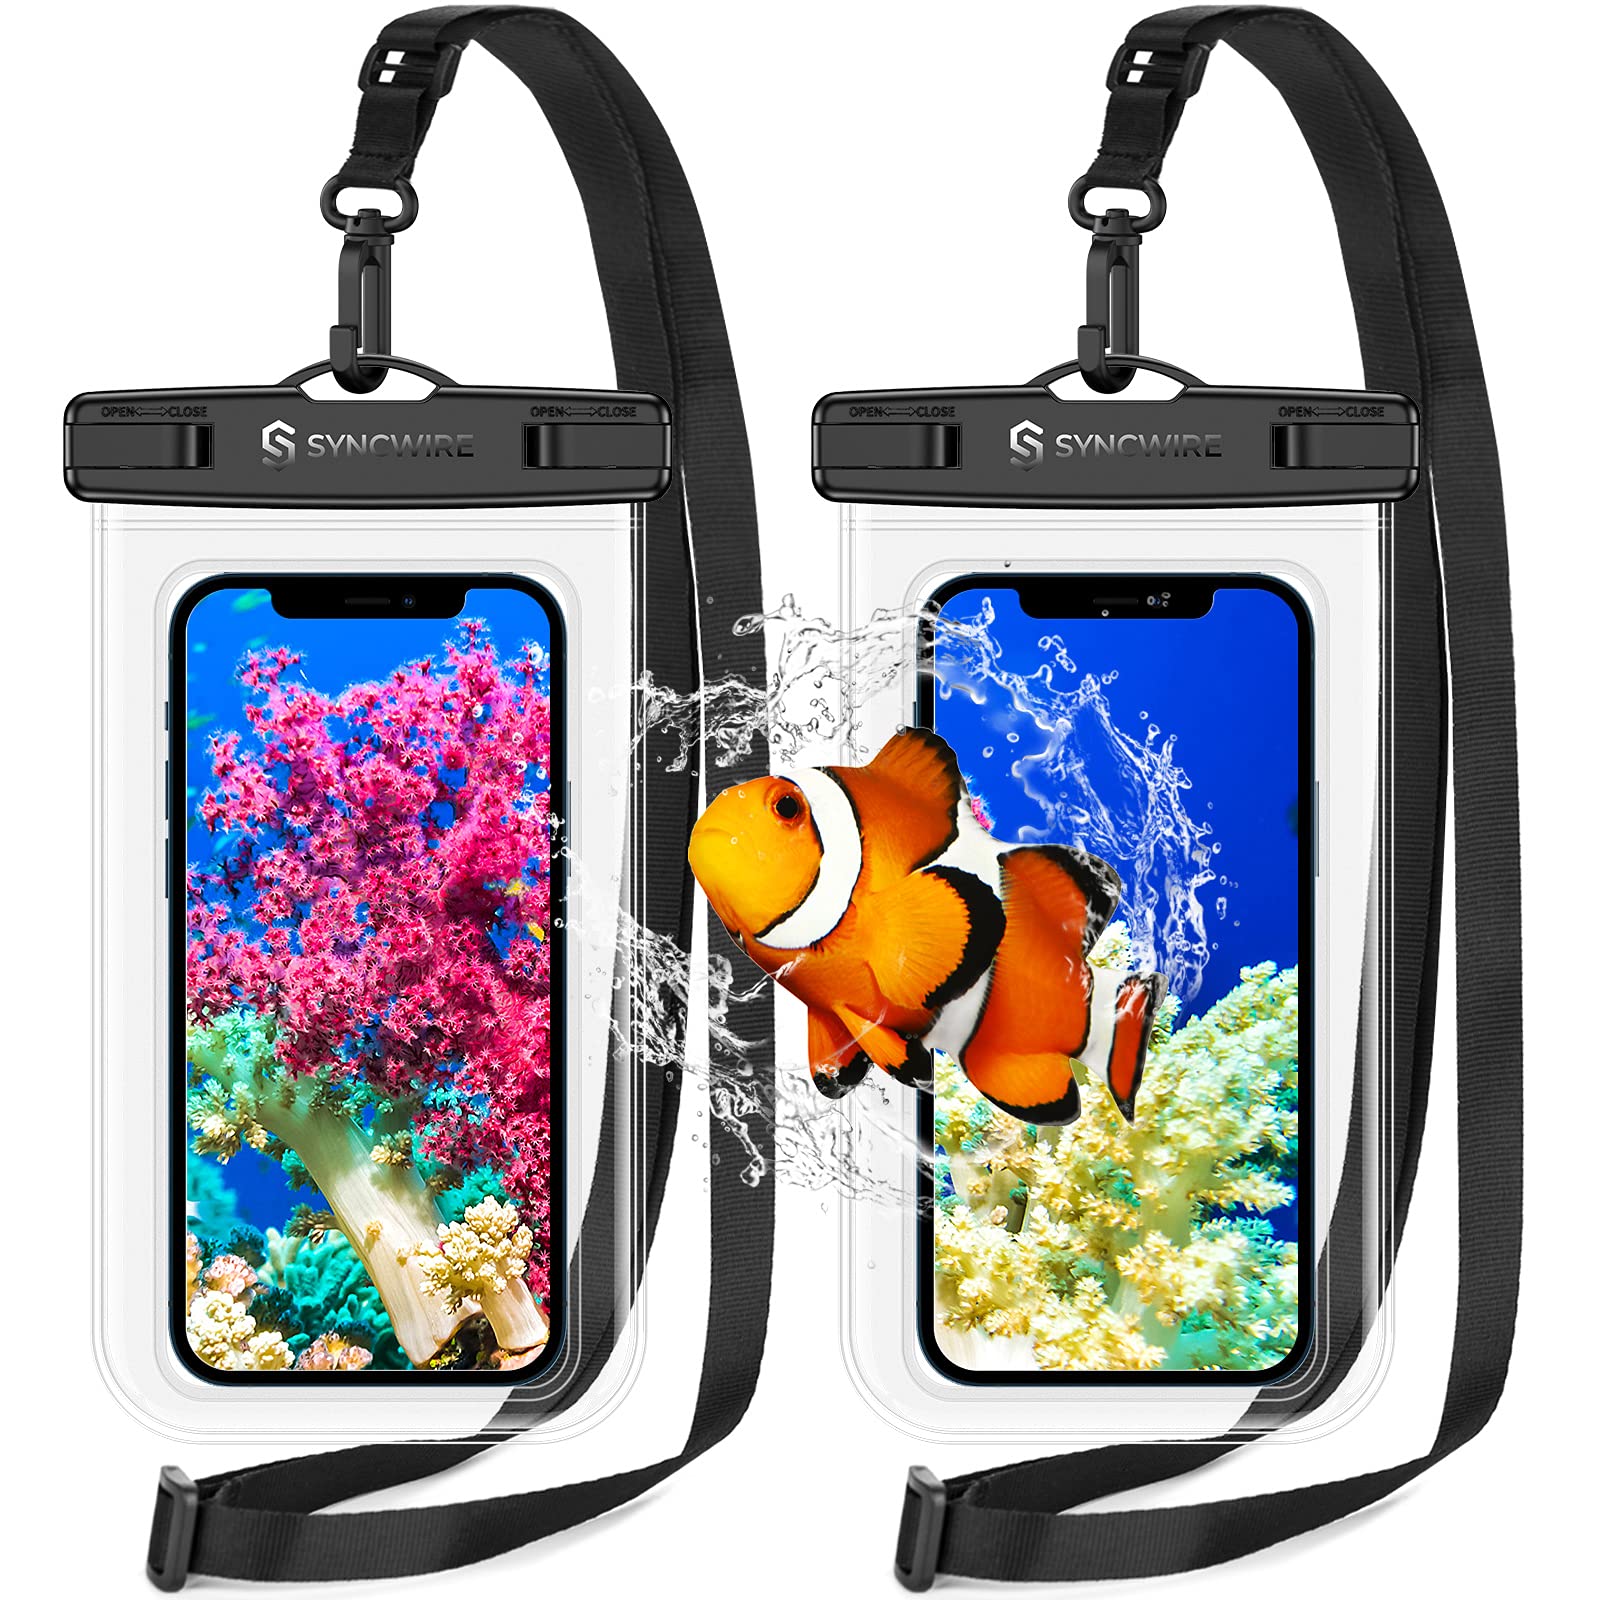 Syncwire Waterproof Phone Pouch [2-Pack] - Universal IPX8 Waterproof Phone Case Dry Bag with Lanyard Compatible with iPhone 13 Pro Max/12/11 Pro XS MAX XR X 8 7 6 Plus 5s Samsung S20+ More Up to 7"